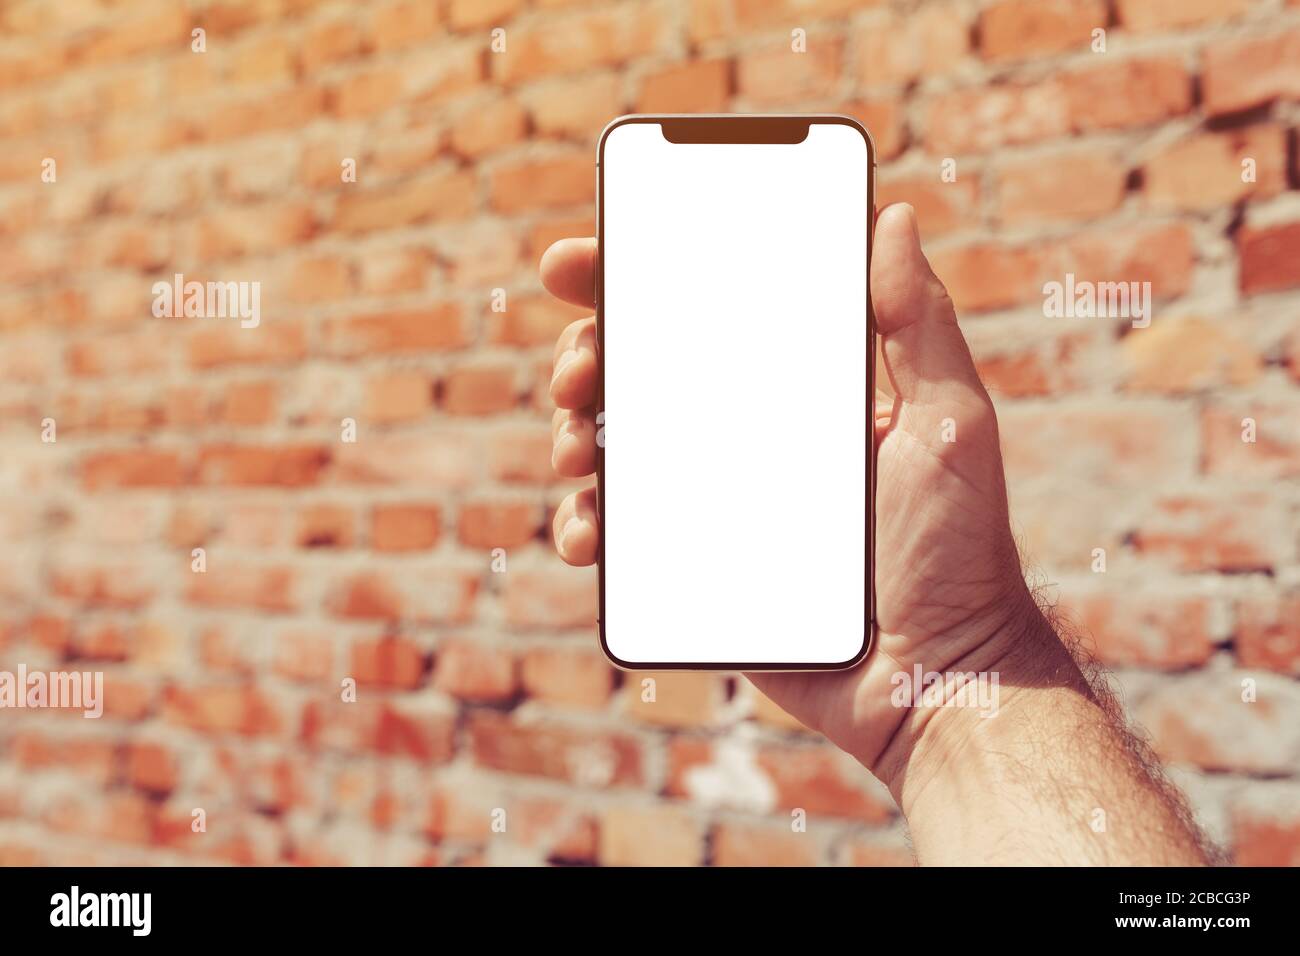 Mockup of smartphone screen on the street in urban surrounding, man holding modern smart phone with blank display as copy space Stock Photo